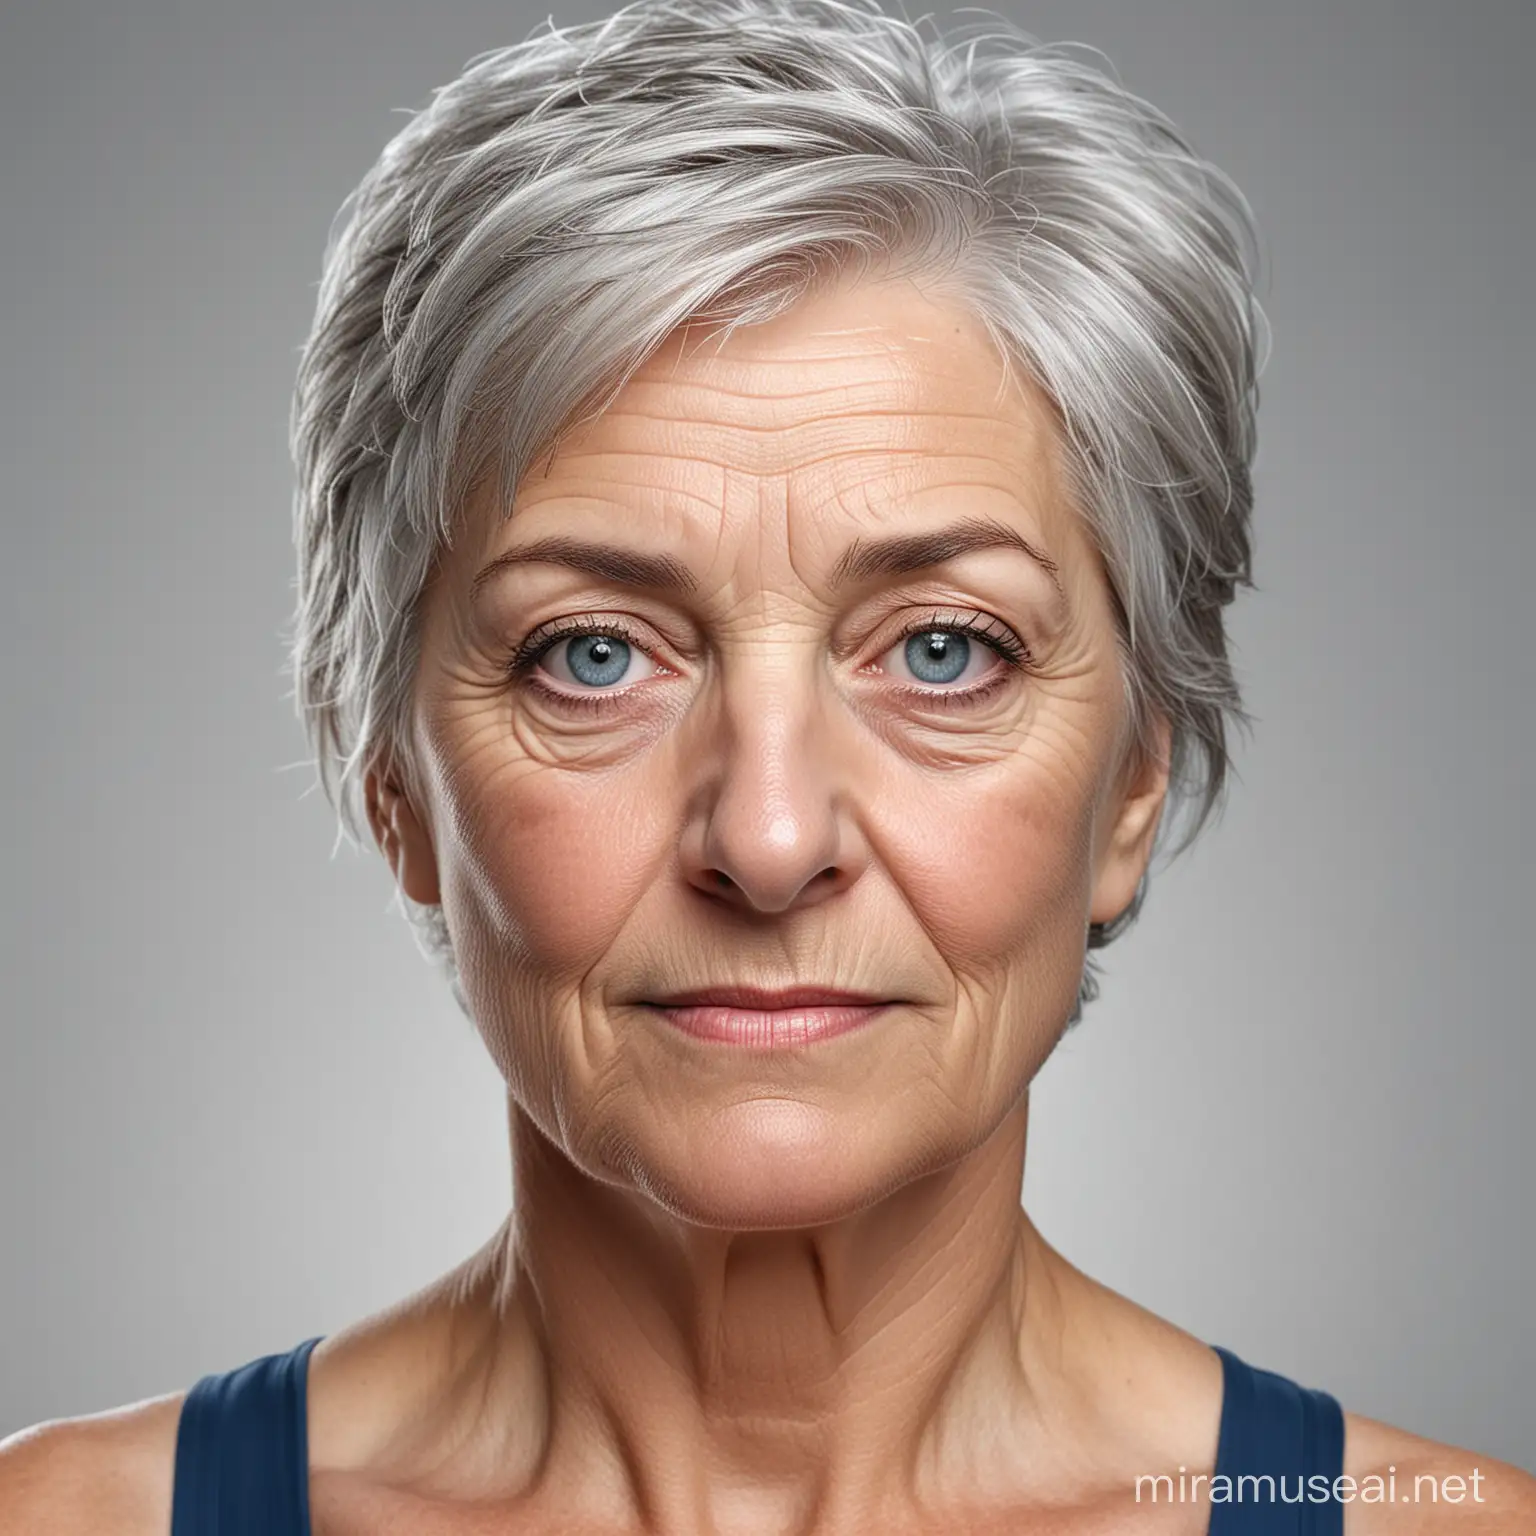 "A passport style hyper realism headshot portrait of an 65 year old woman from eastern europe, She has very short gray hair and blue eyes. She has etended ammount of facefolds. She is wearing a swimsuite, she is wearing no makeup. The background is solid white. Her expression is neutral and she is facing forward towards the camera."
